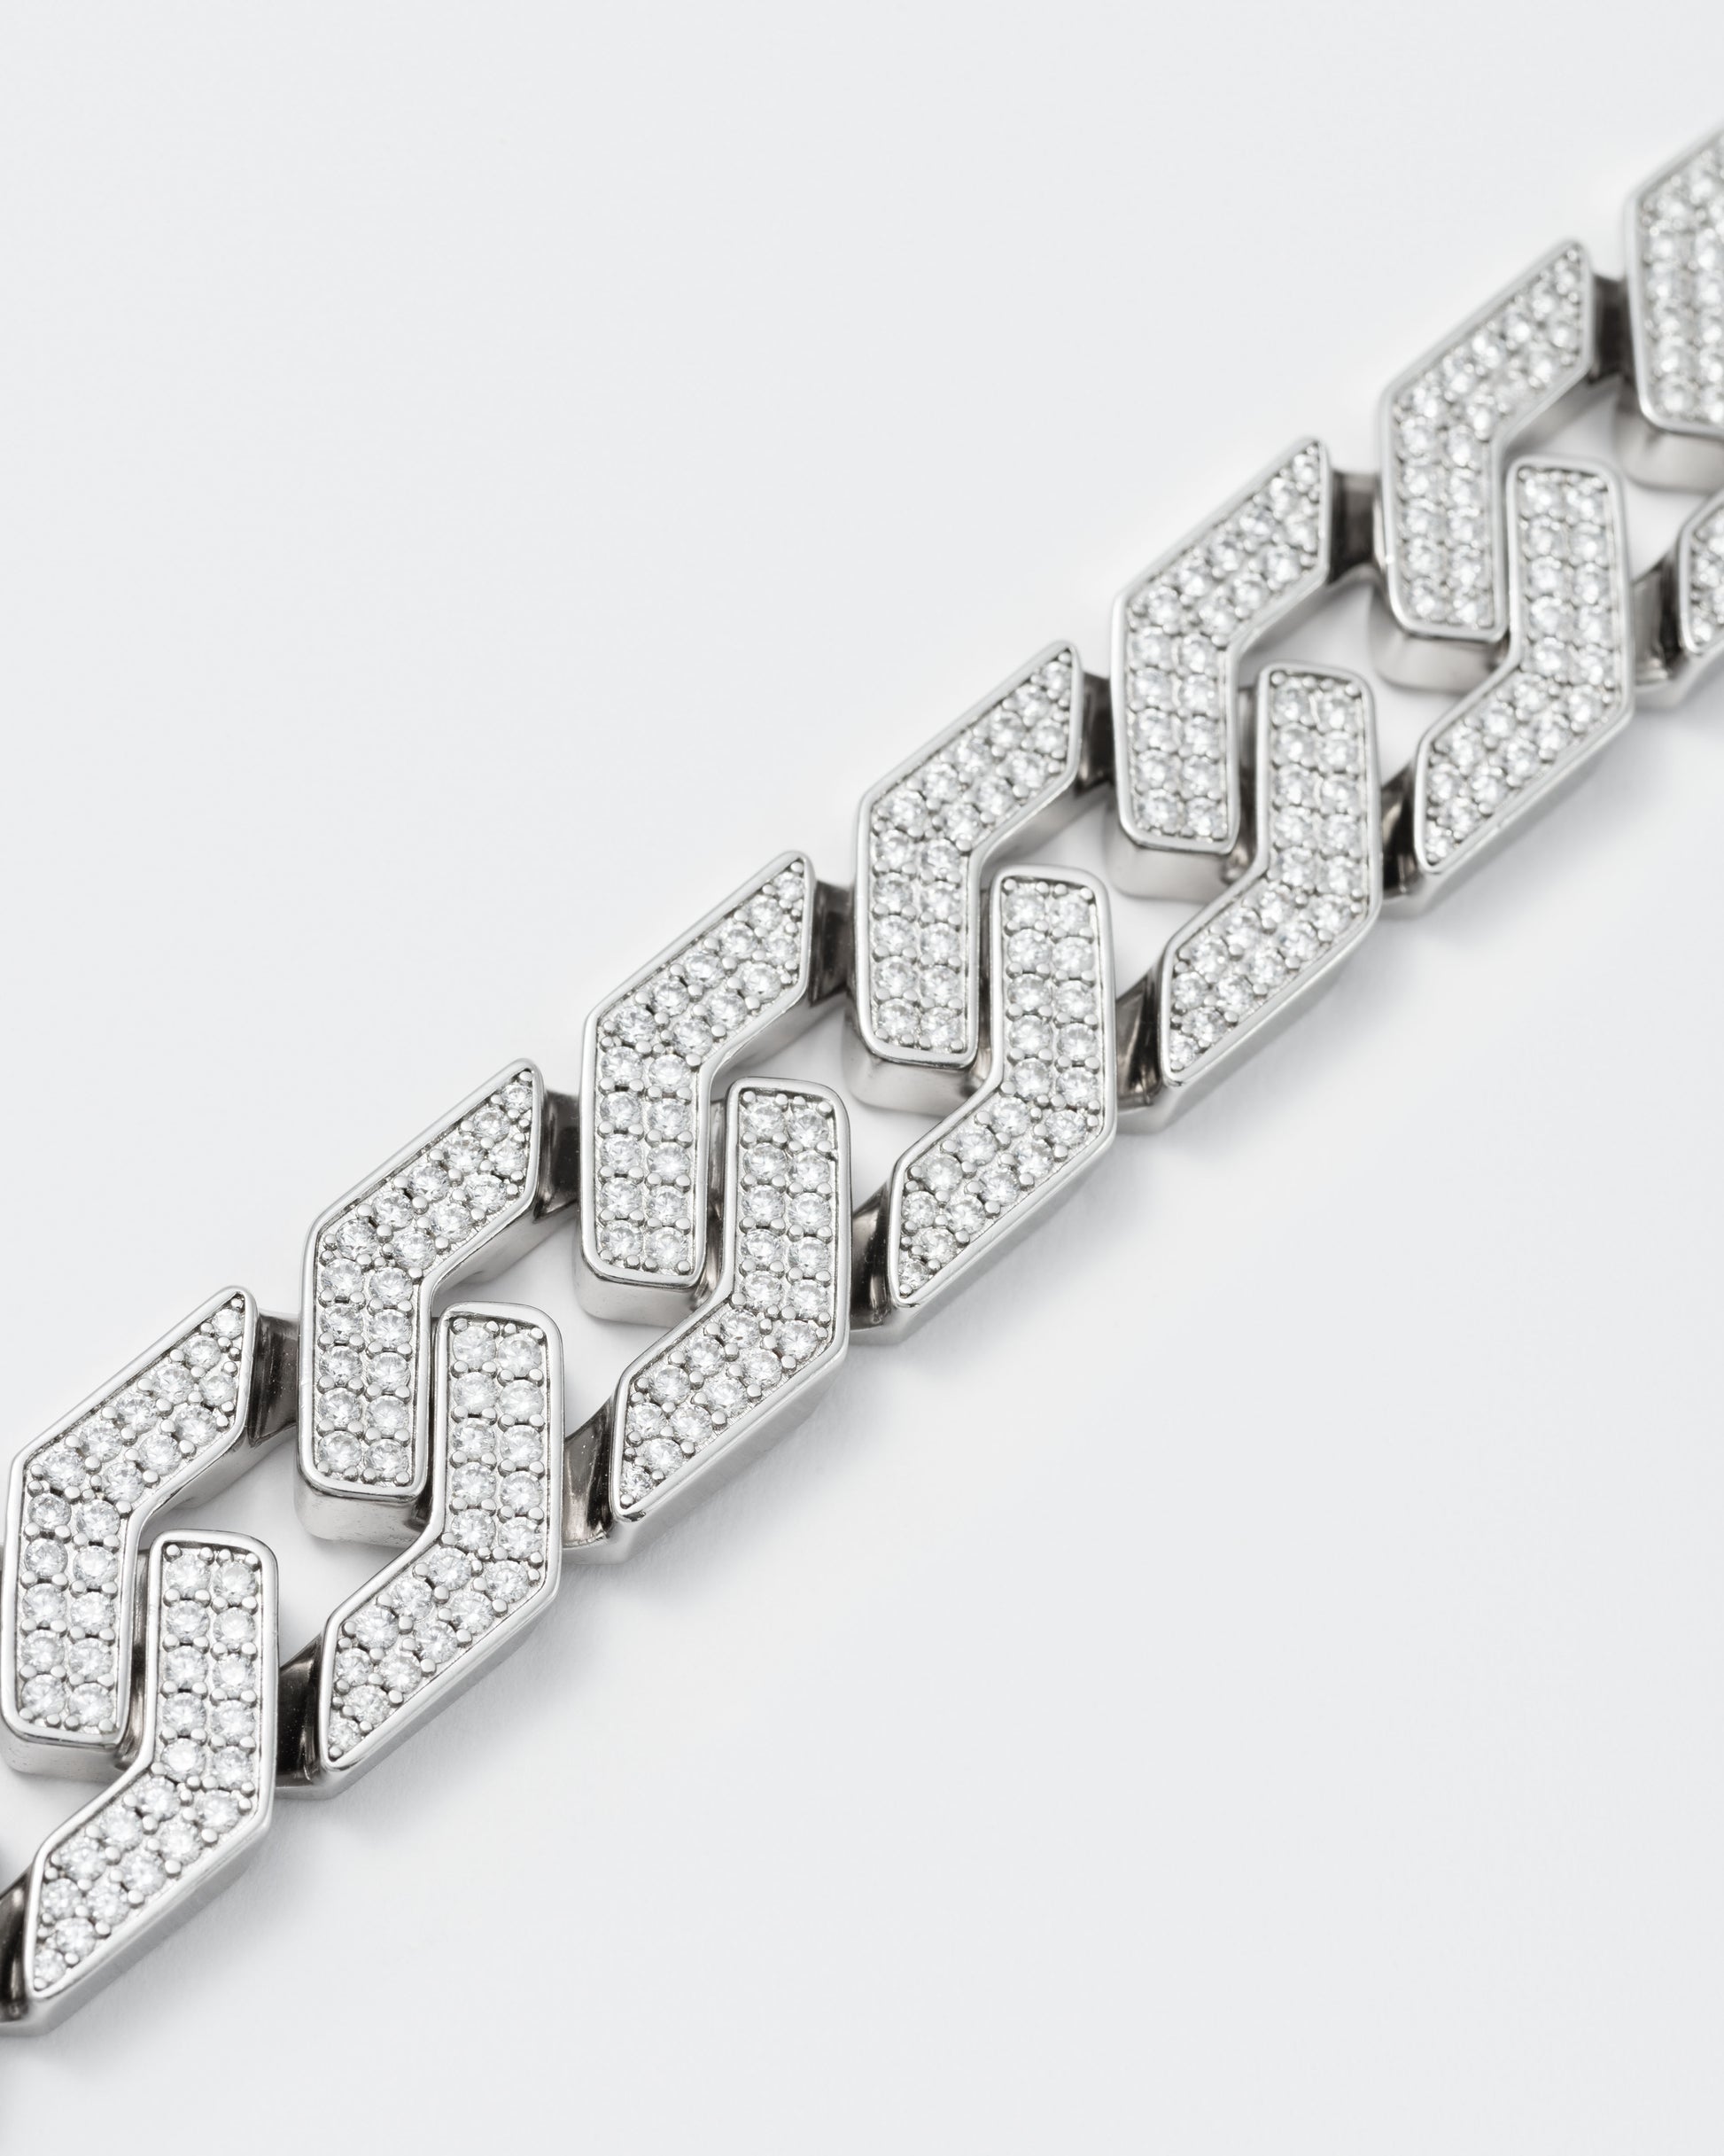 detail of oversize prong chain necklace with 18kt white gold coating and hand-set micropavé stones in diamond white. Fine jewelry grade drawer closure with logo